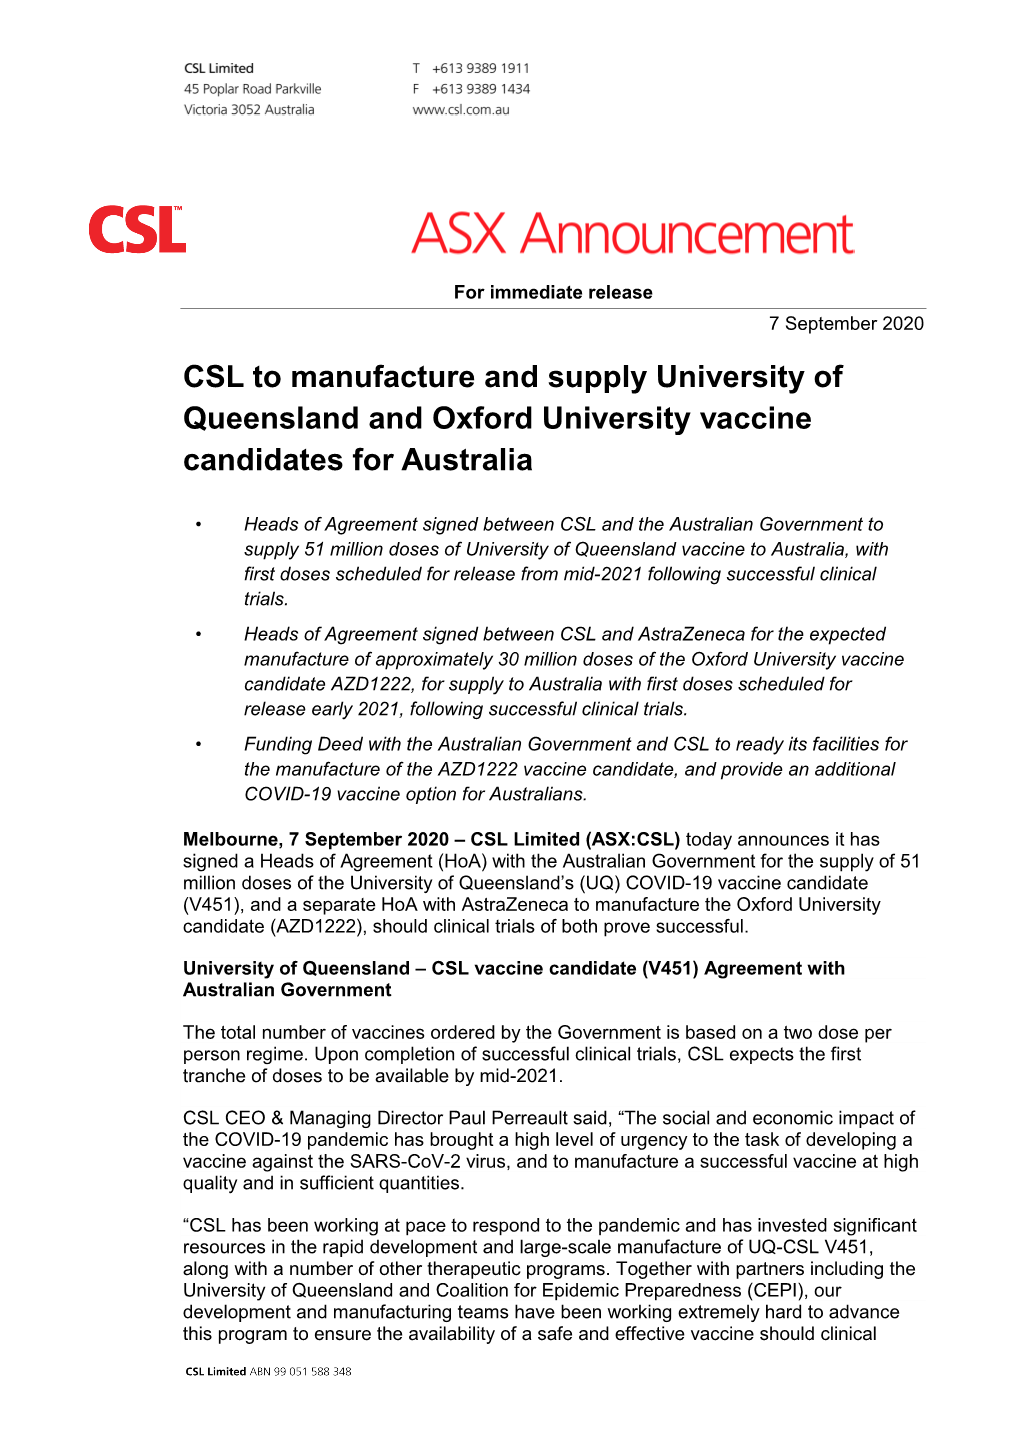 CSL to Manufacture and Supply University of Queensland and Oxford University Vaccine Candidates for Australia